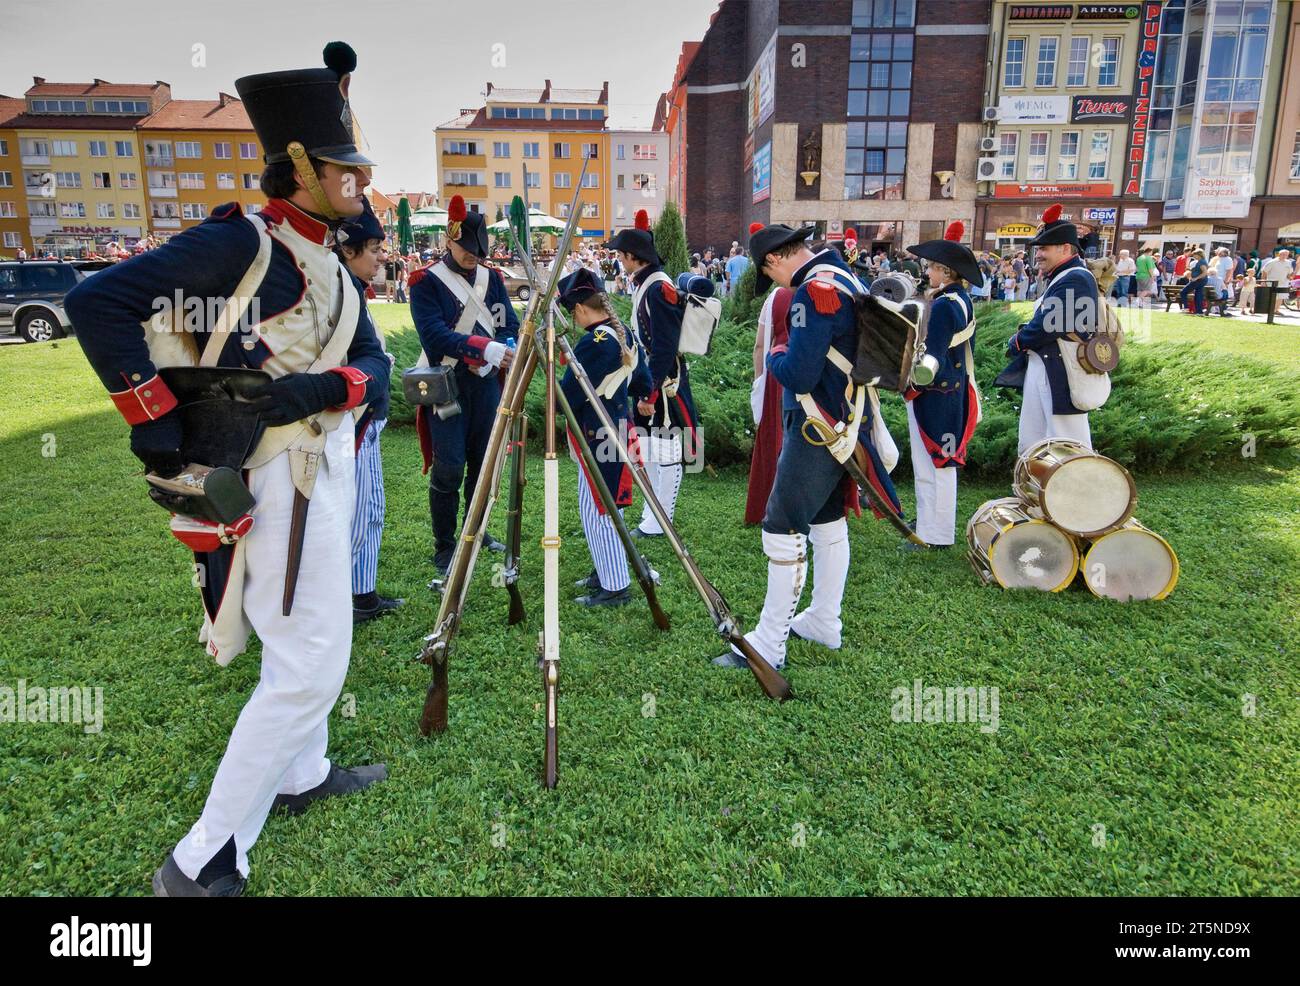 Prussian troops reenactors at city square before Reenactment of Siege of Neisse during Napoleonic War with Prussia in 1807, in Nysa, Opolskie, Poland Stock Photo